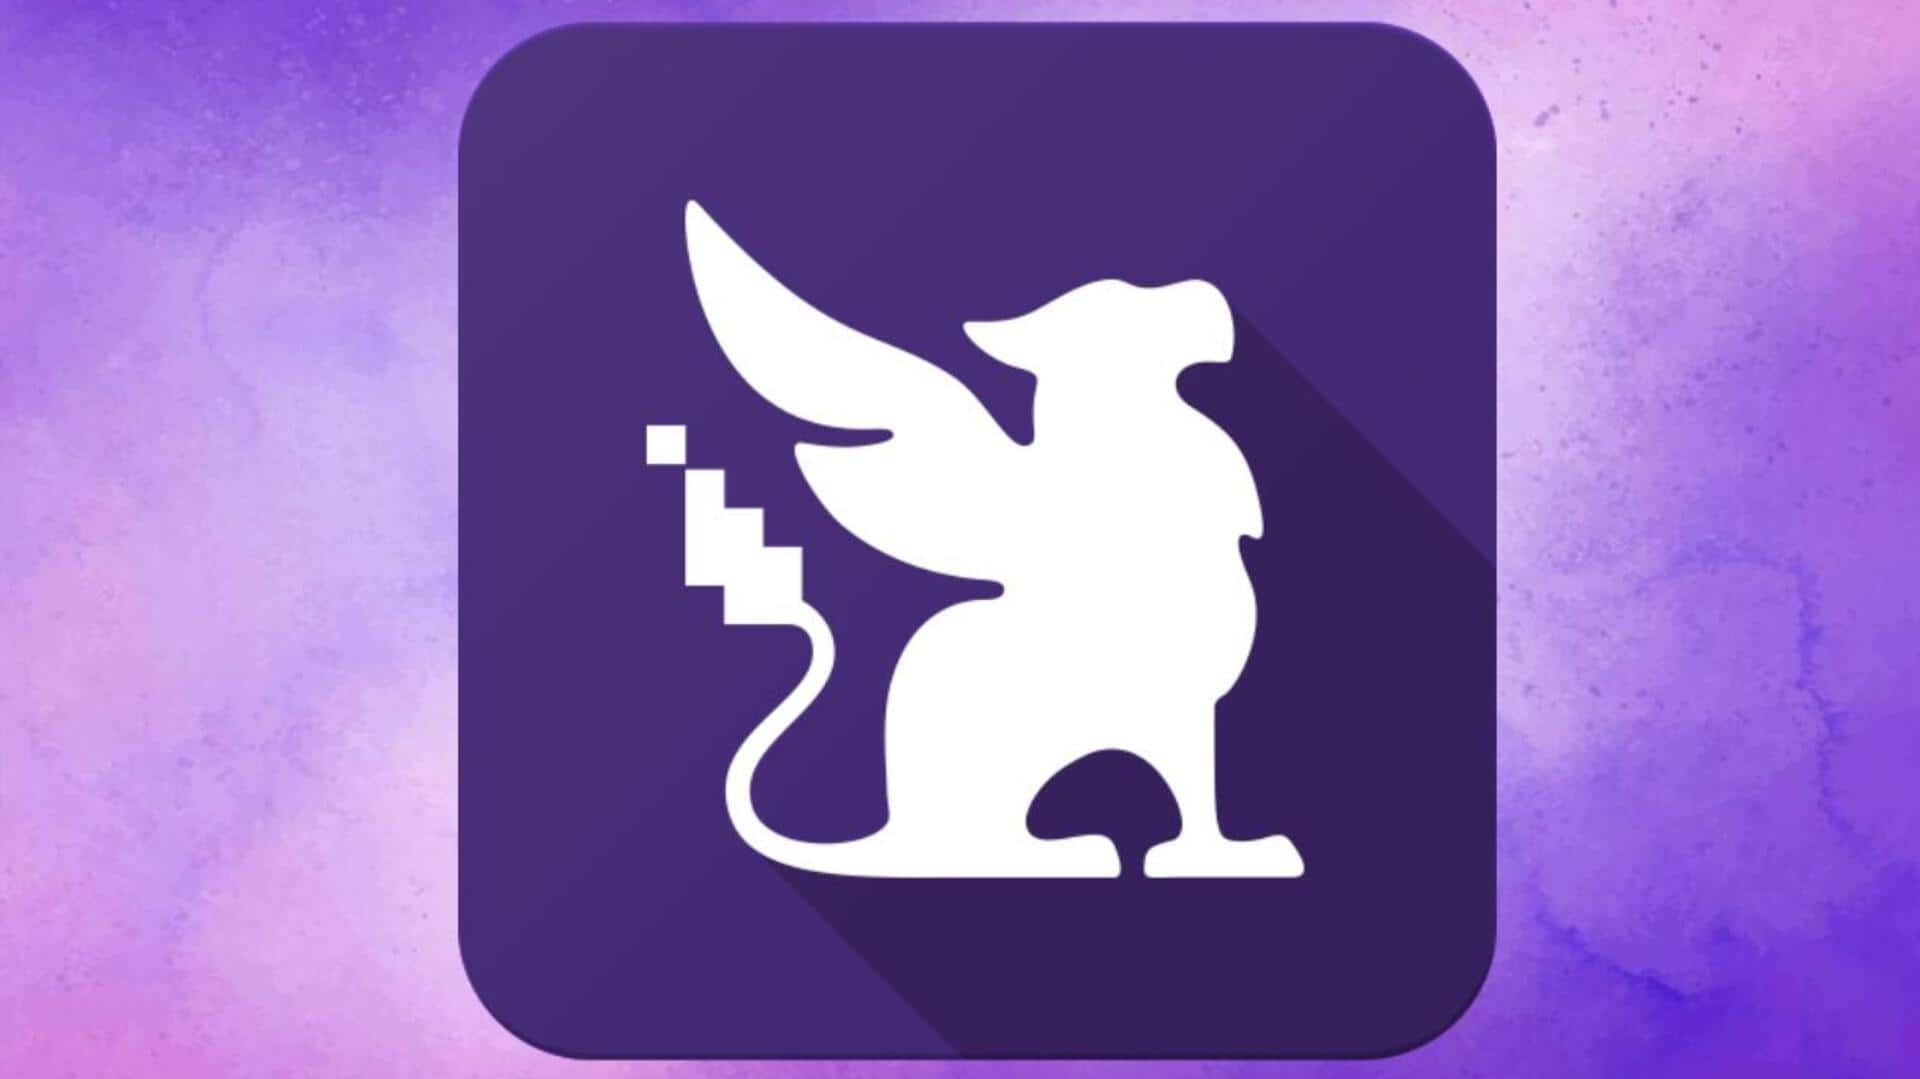 Habitica: An app that improves productivity with engaging games